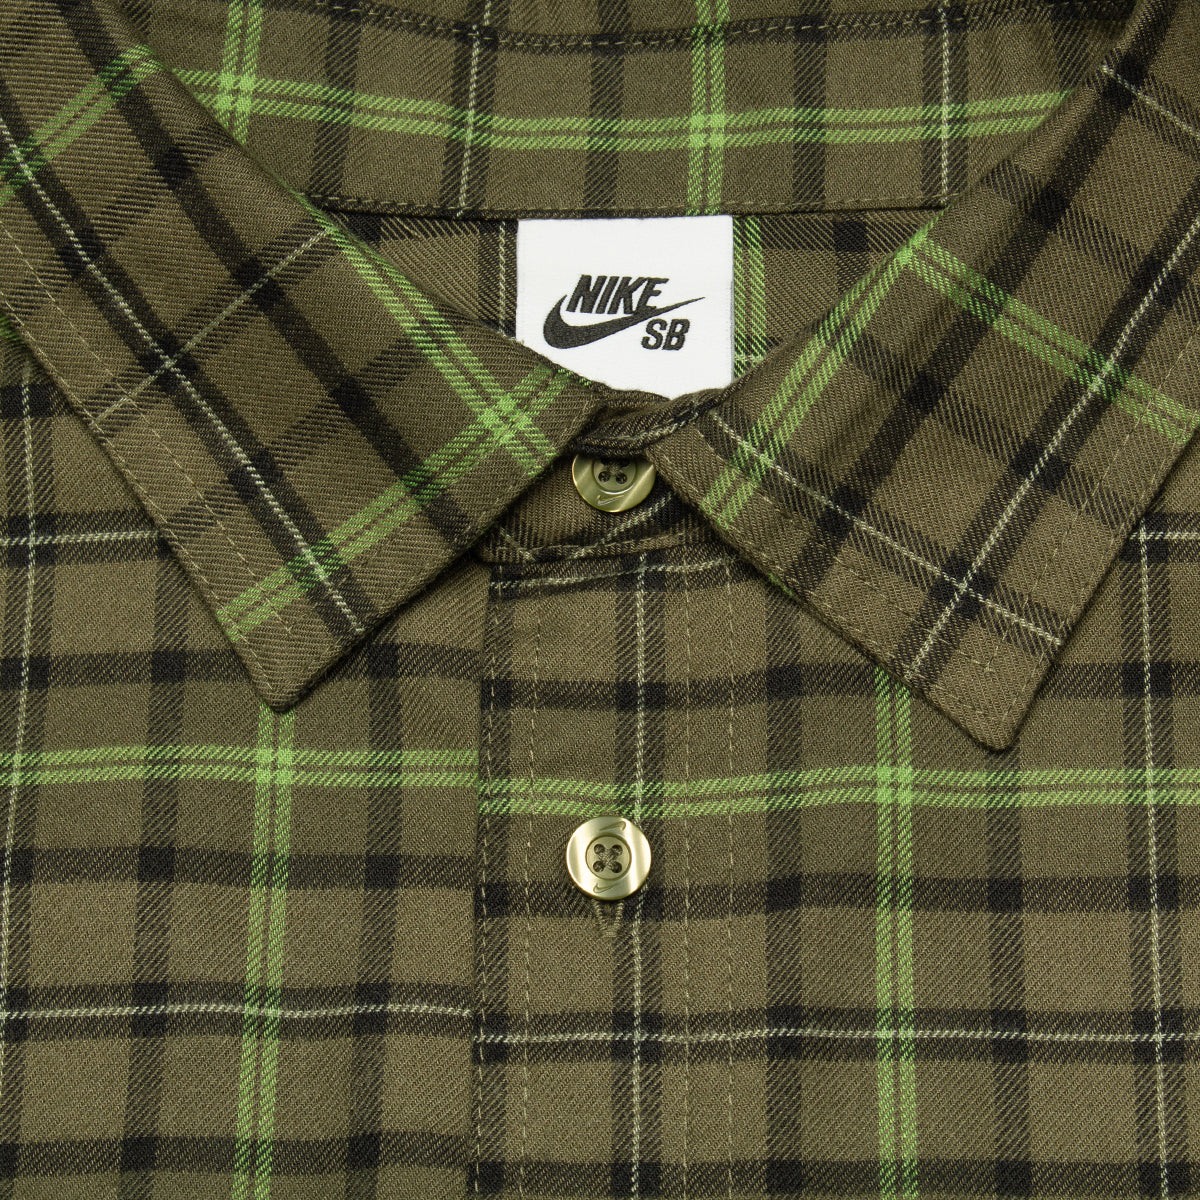 Nike SB | L/S Flannel Button-Up Shirt Style # FN2567-222 Color : Medium Olive / Cargo Khaki